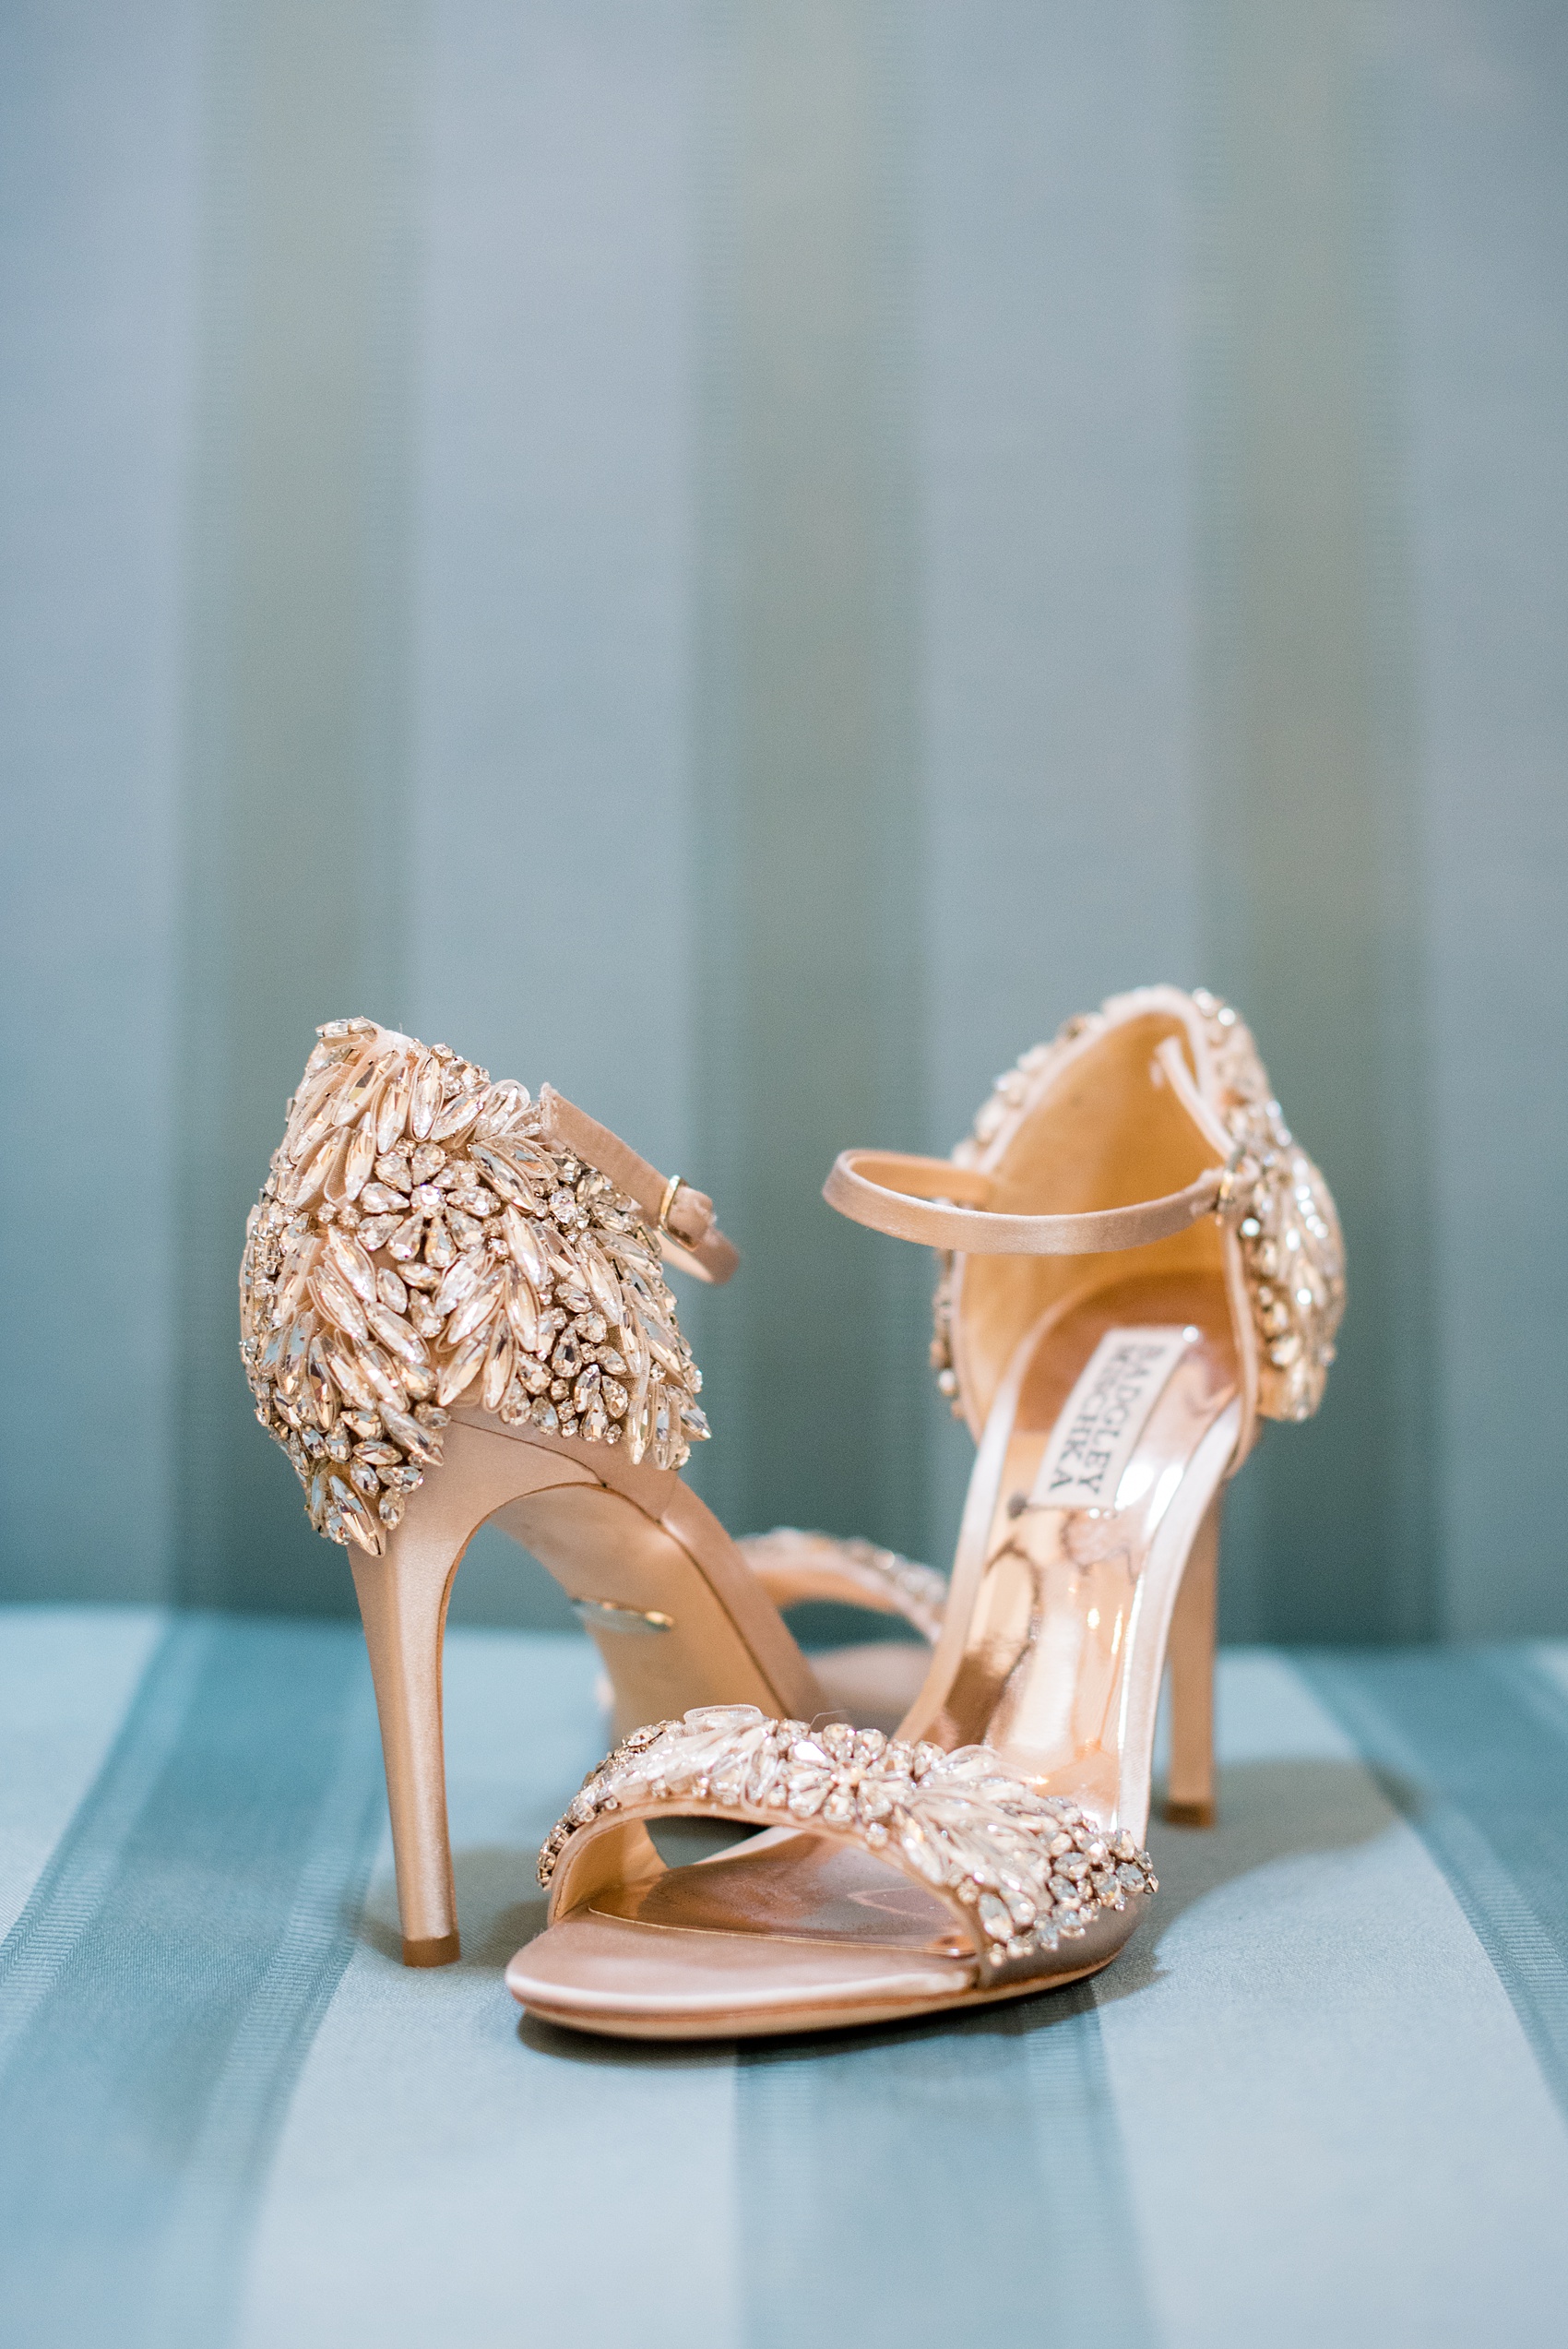 Mikkel Paige Photography photos from a wedding at Duke Chapel and Hope Valley Country Club in North Carolina. Detail photo of the bride's rhinestone gold Badgley Mischka heels against teal.